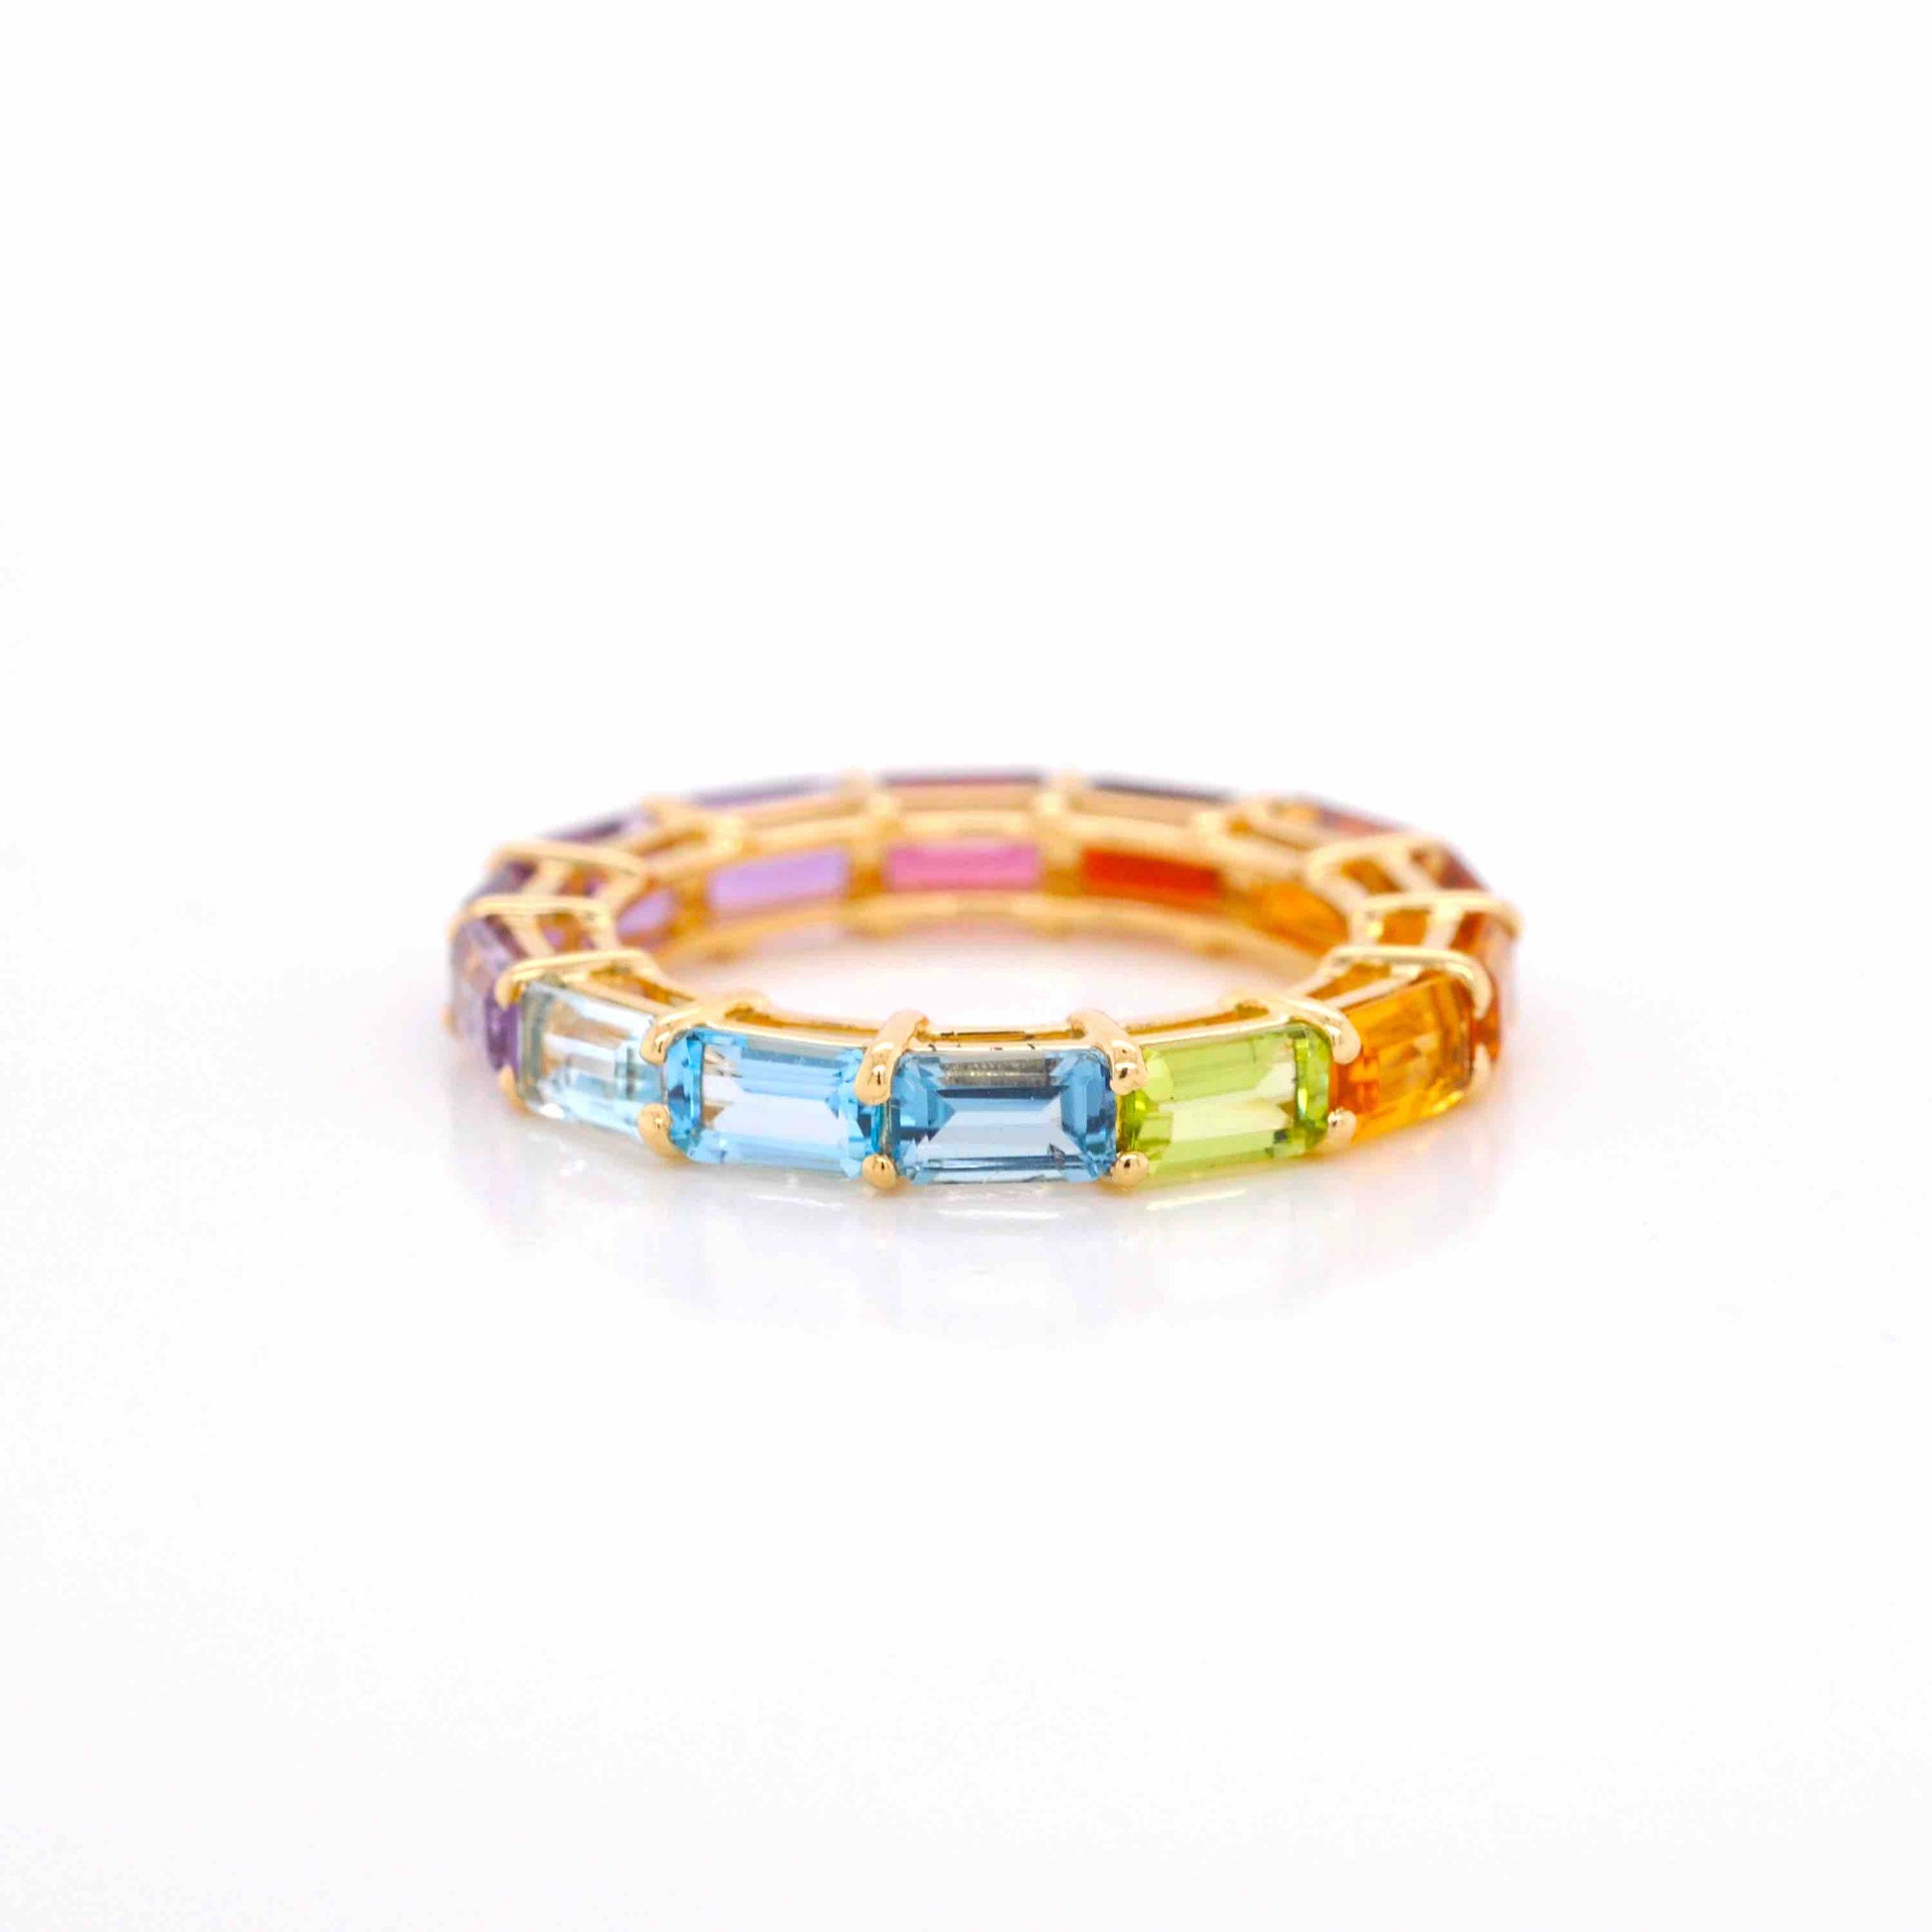 Multicolor eternity band with yellow gold